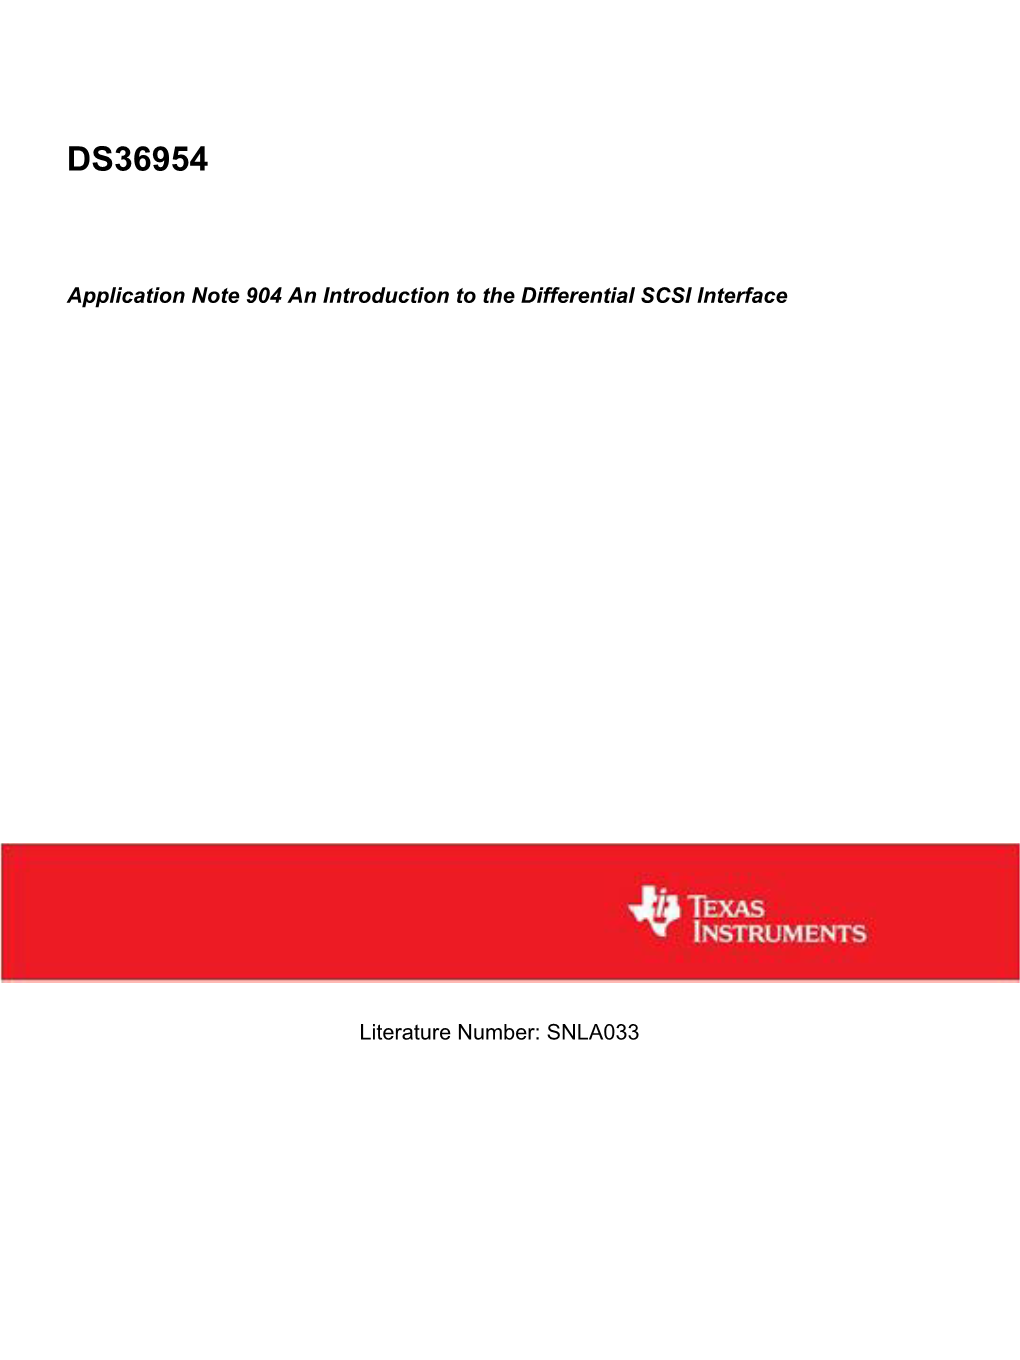 Application Note 904 an Introduction to the Differential SCSI Interface